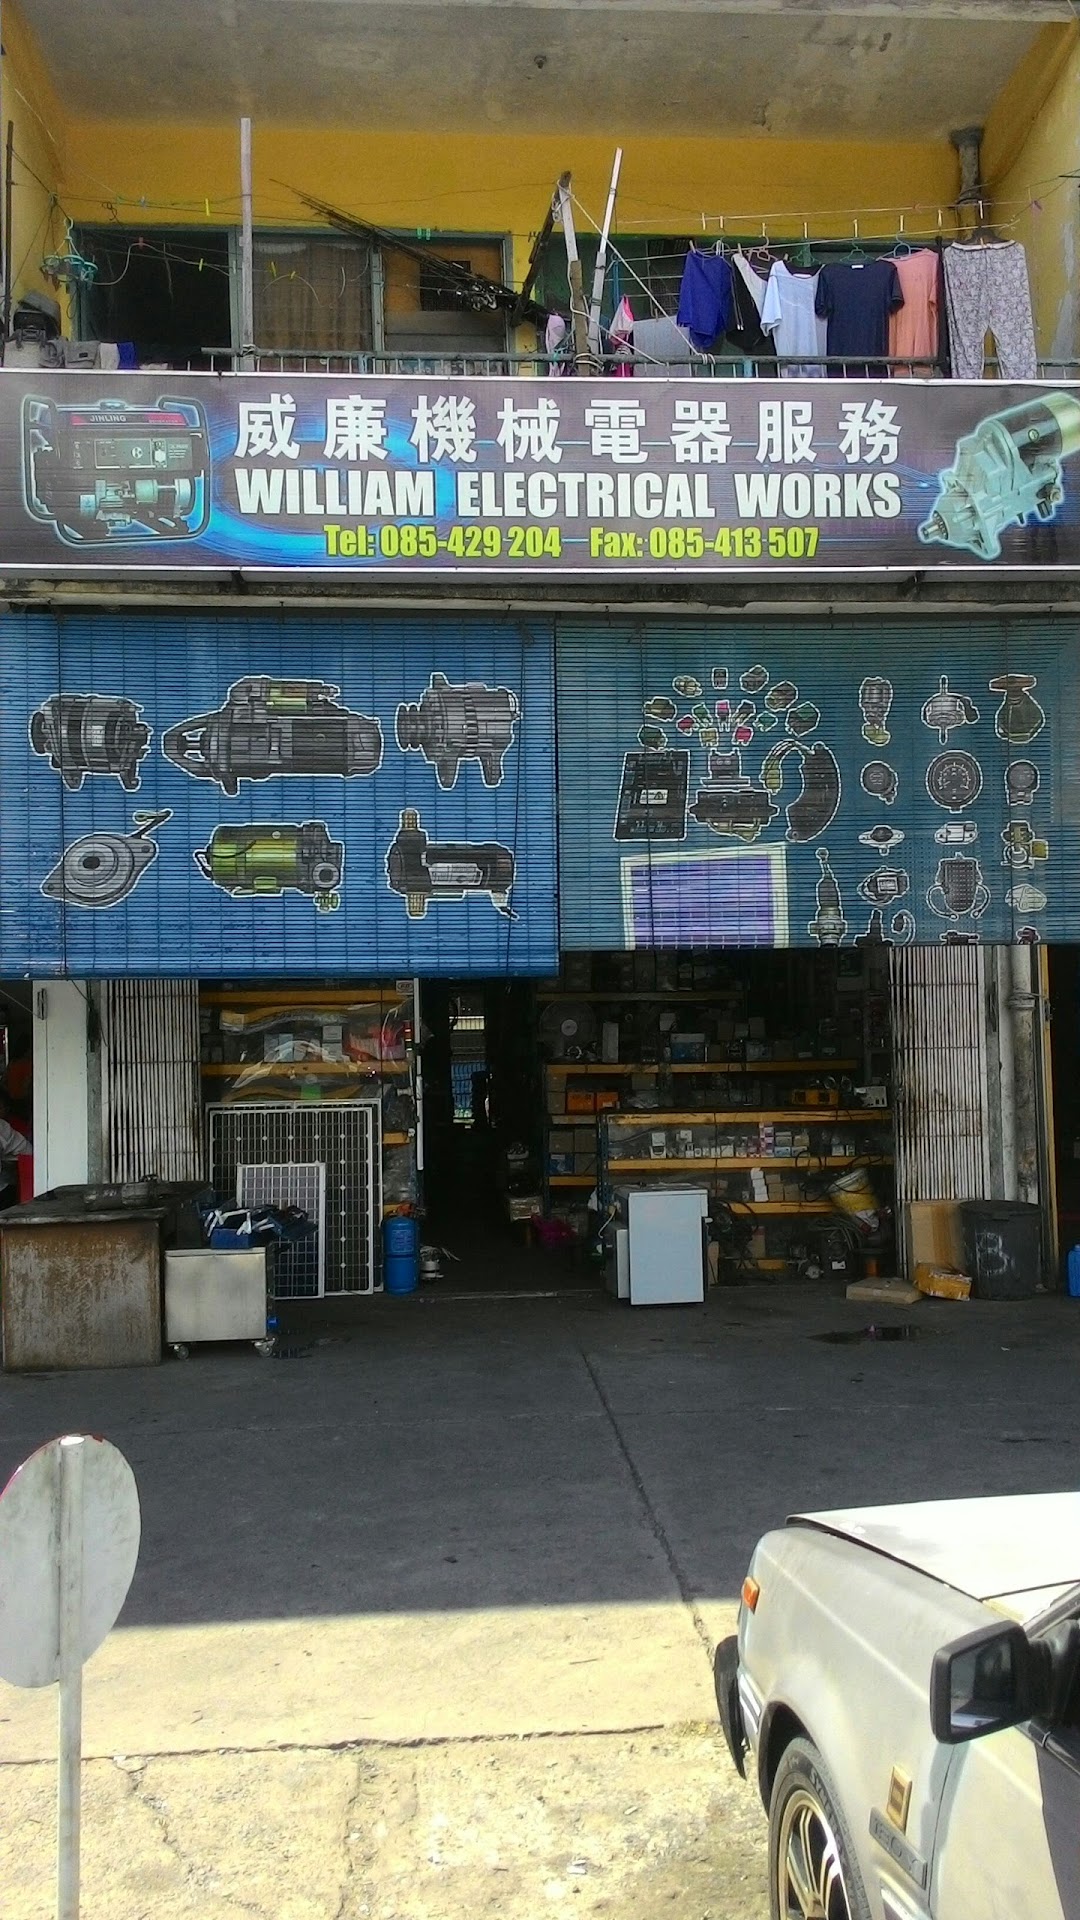 William Electrical Works